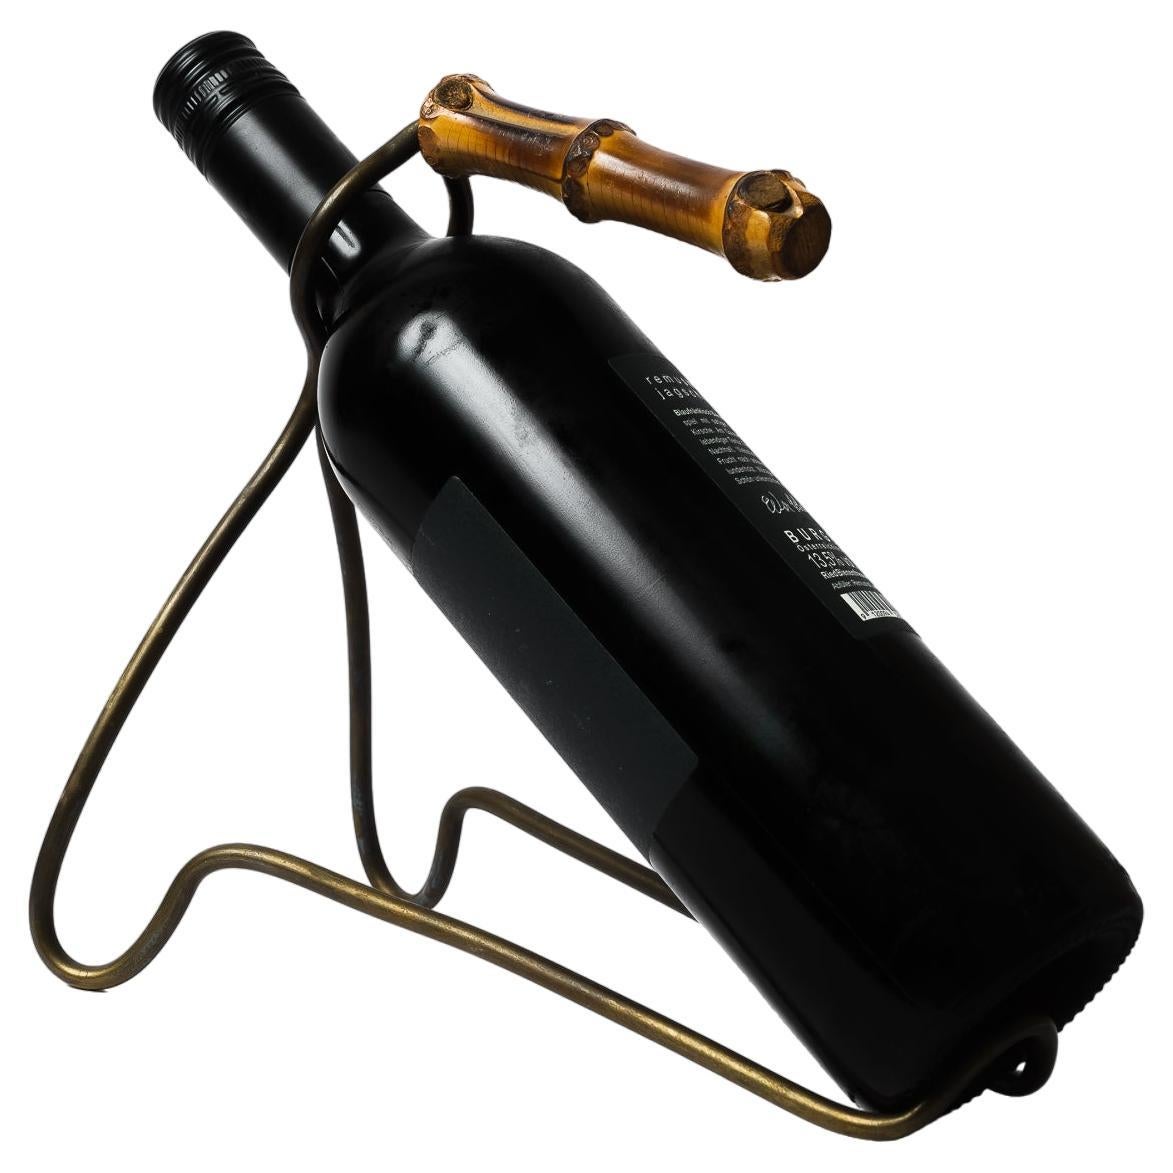 Bottle Holder by Auböck Around, 1950s
(The bottle is only for the photoshooting and it is not included.)
Original condition